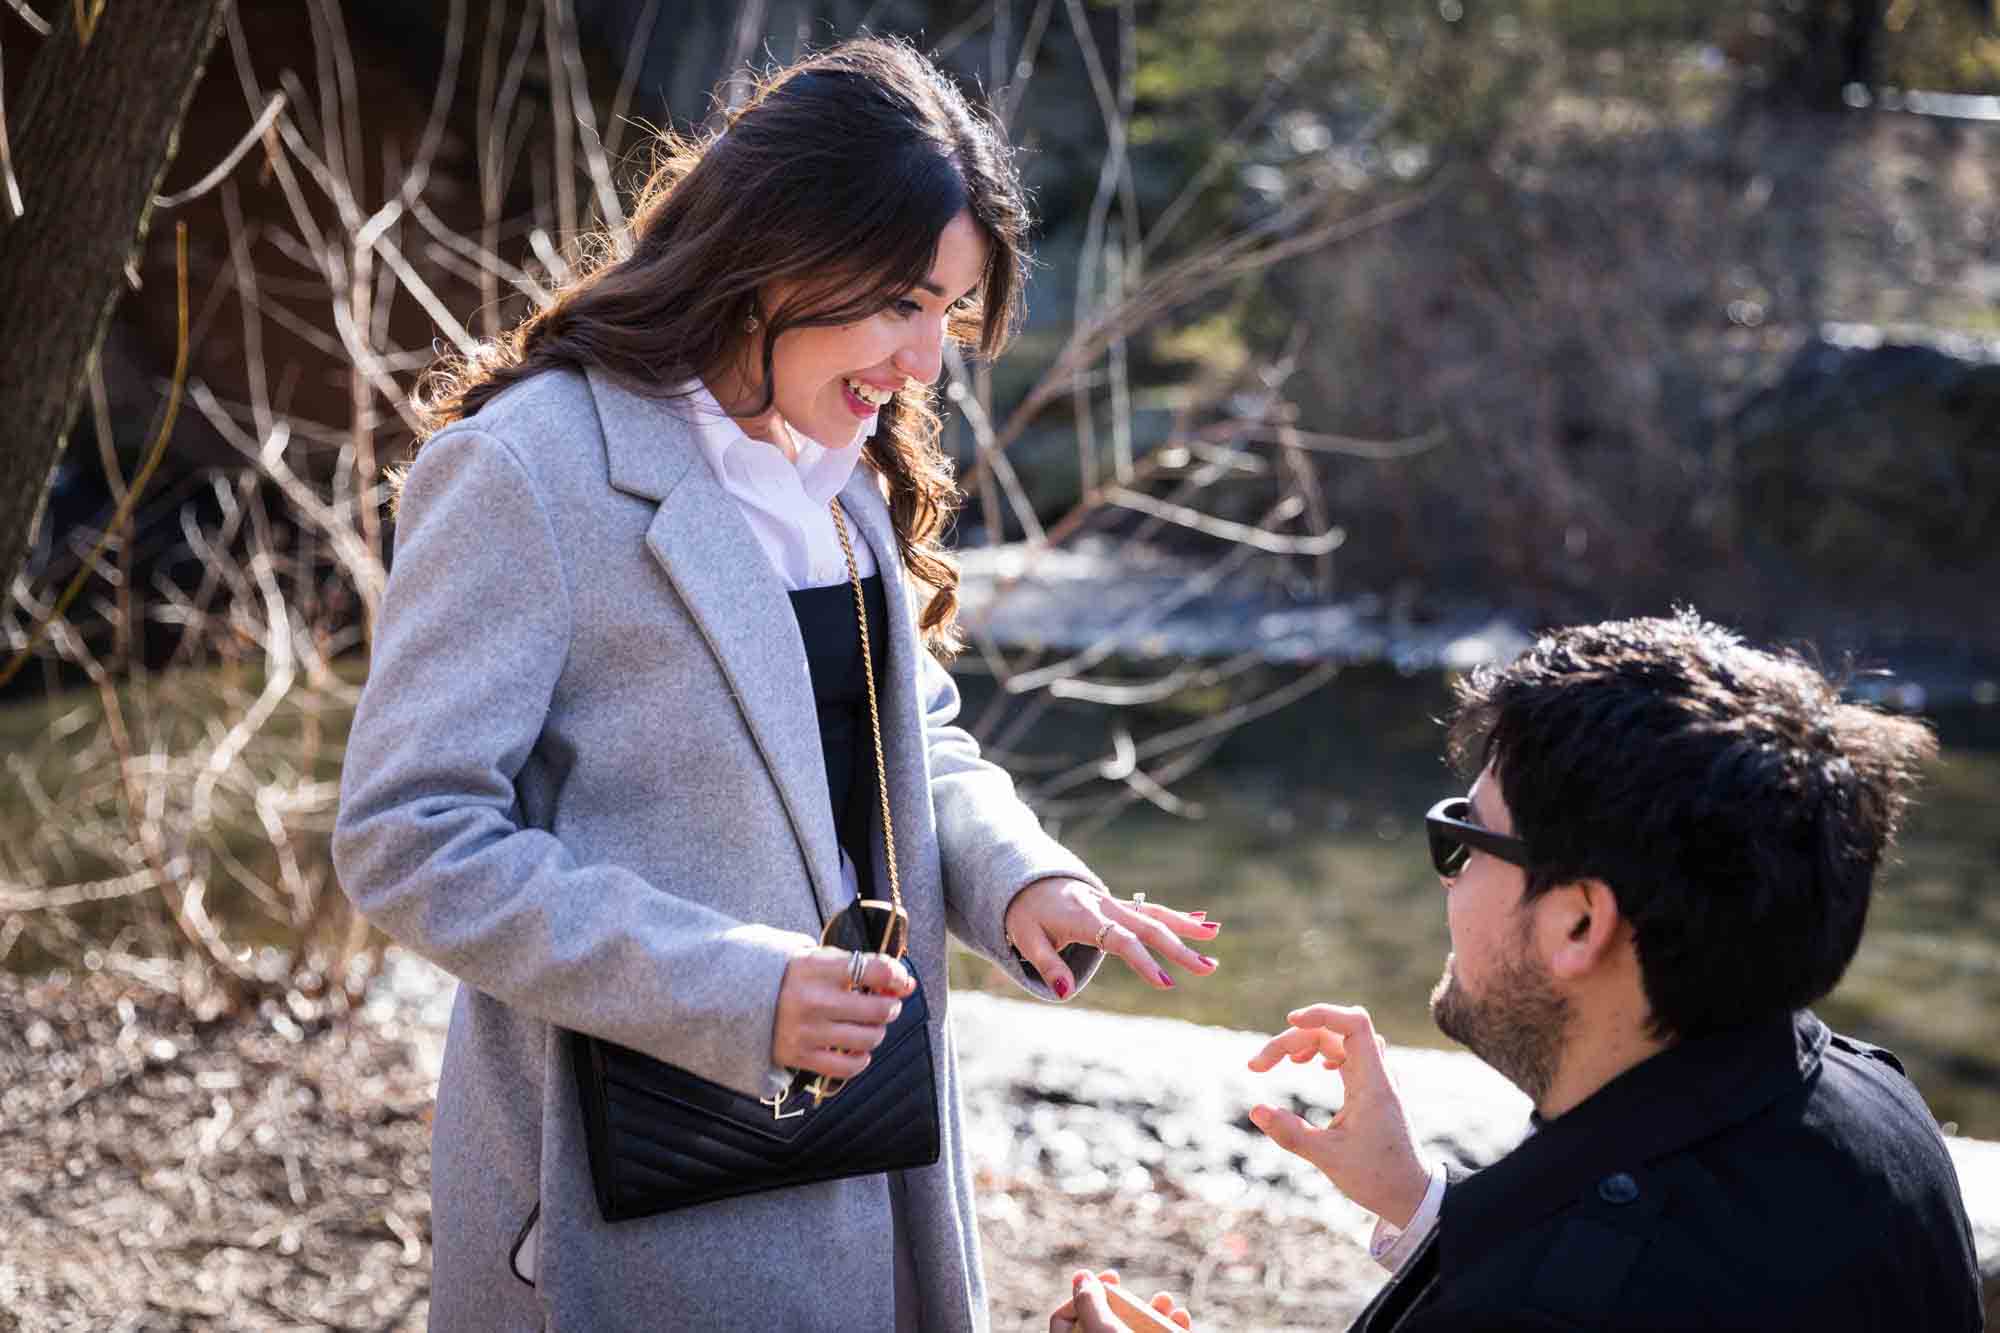 Woman looking down at engagement ring on her hand during a Gapstow Bridge surprise proposal in Central Park